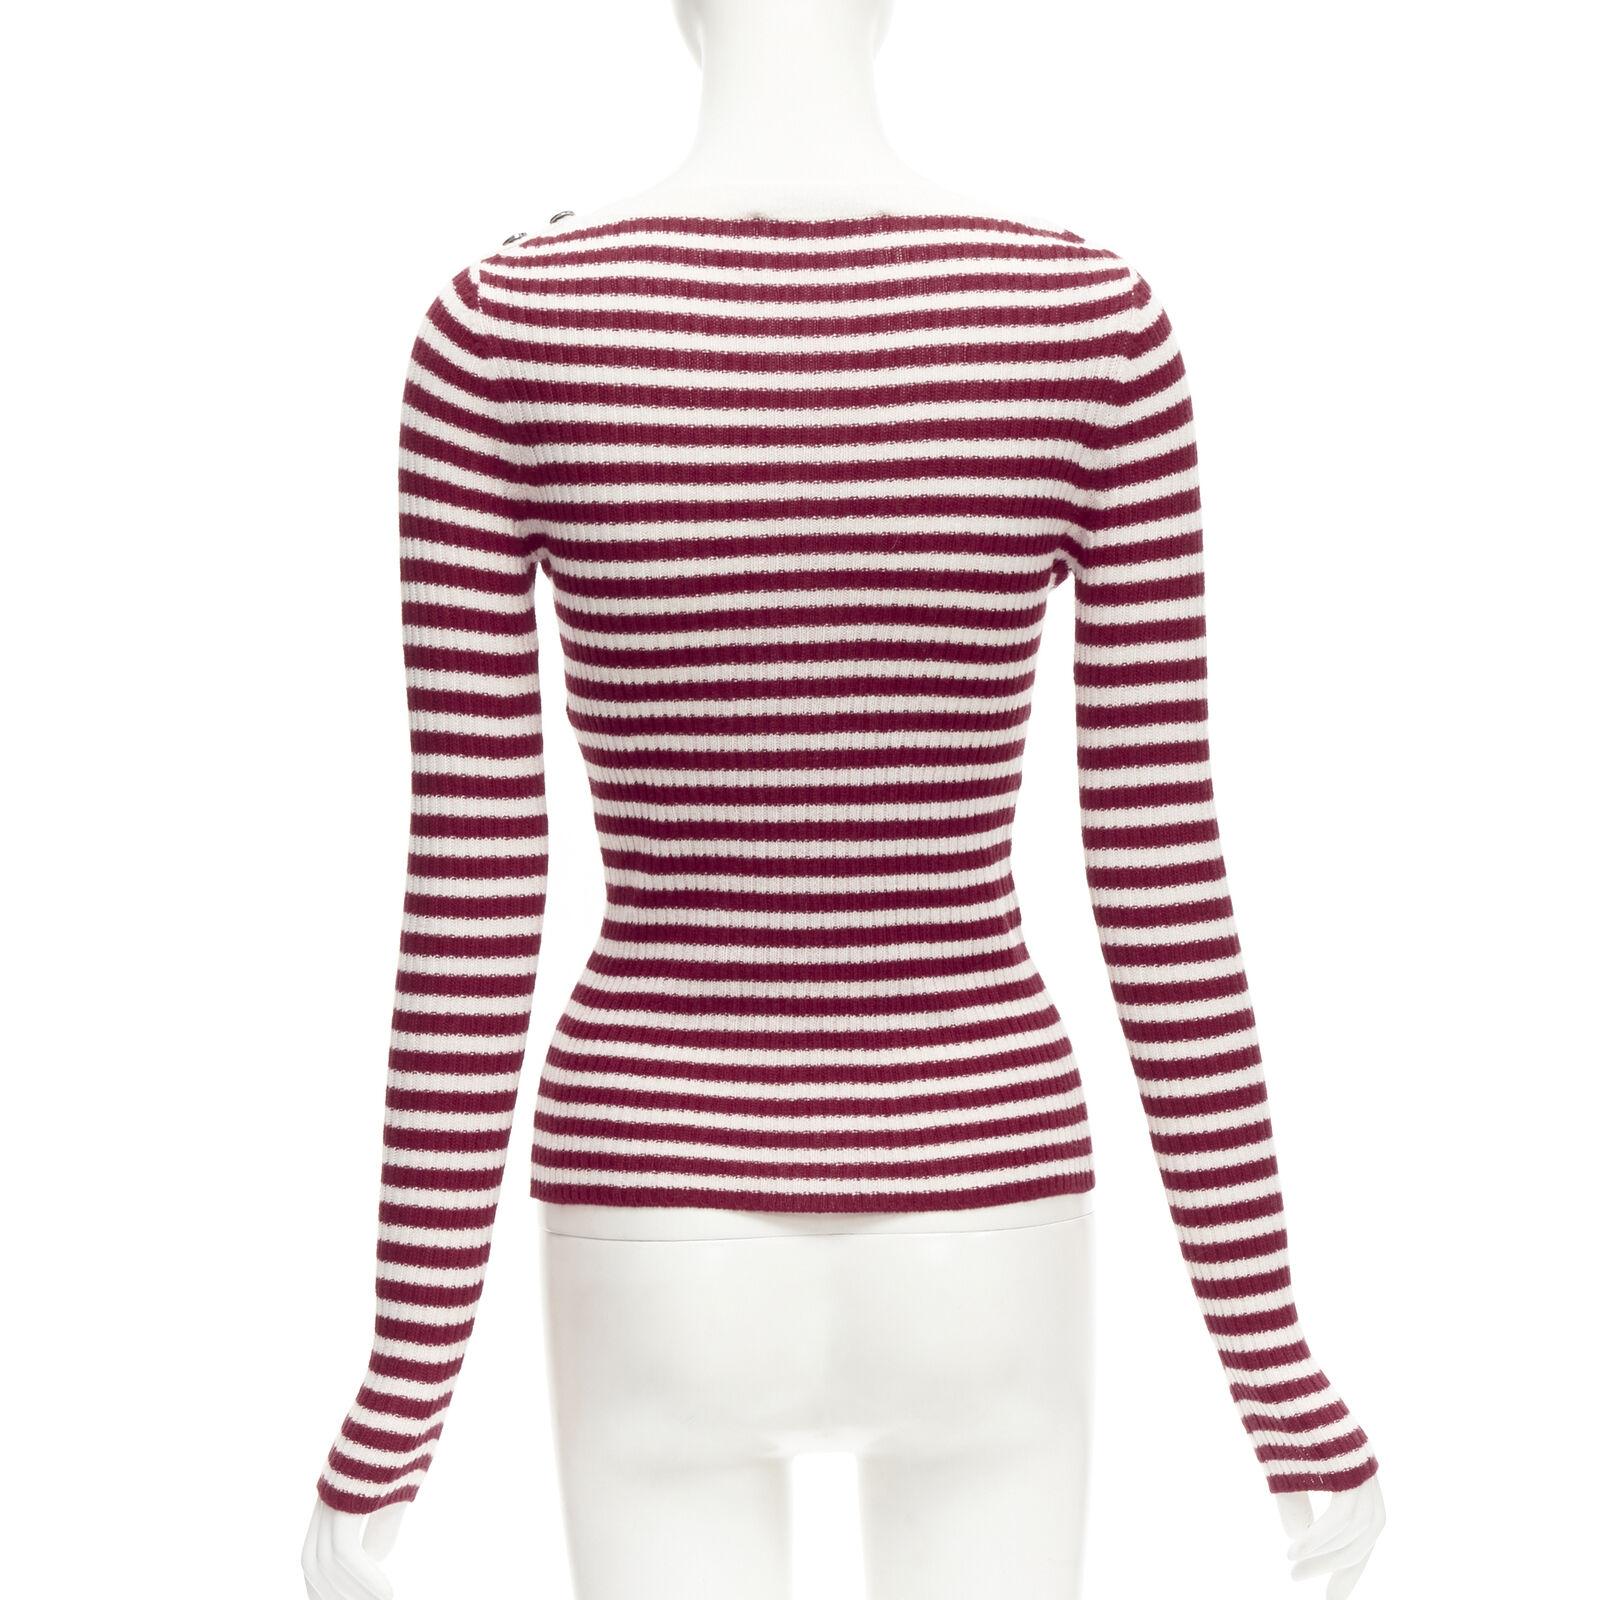 Women's CHRISTIAN DIOR 100% cashmere white red striped boat neck CD button top FR34 XS